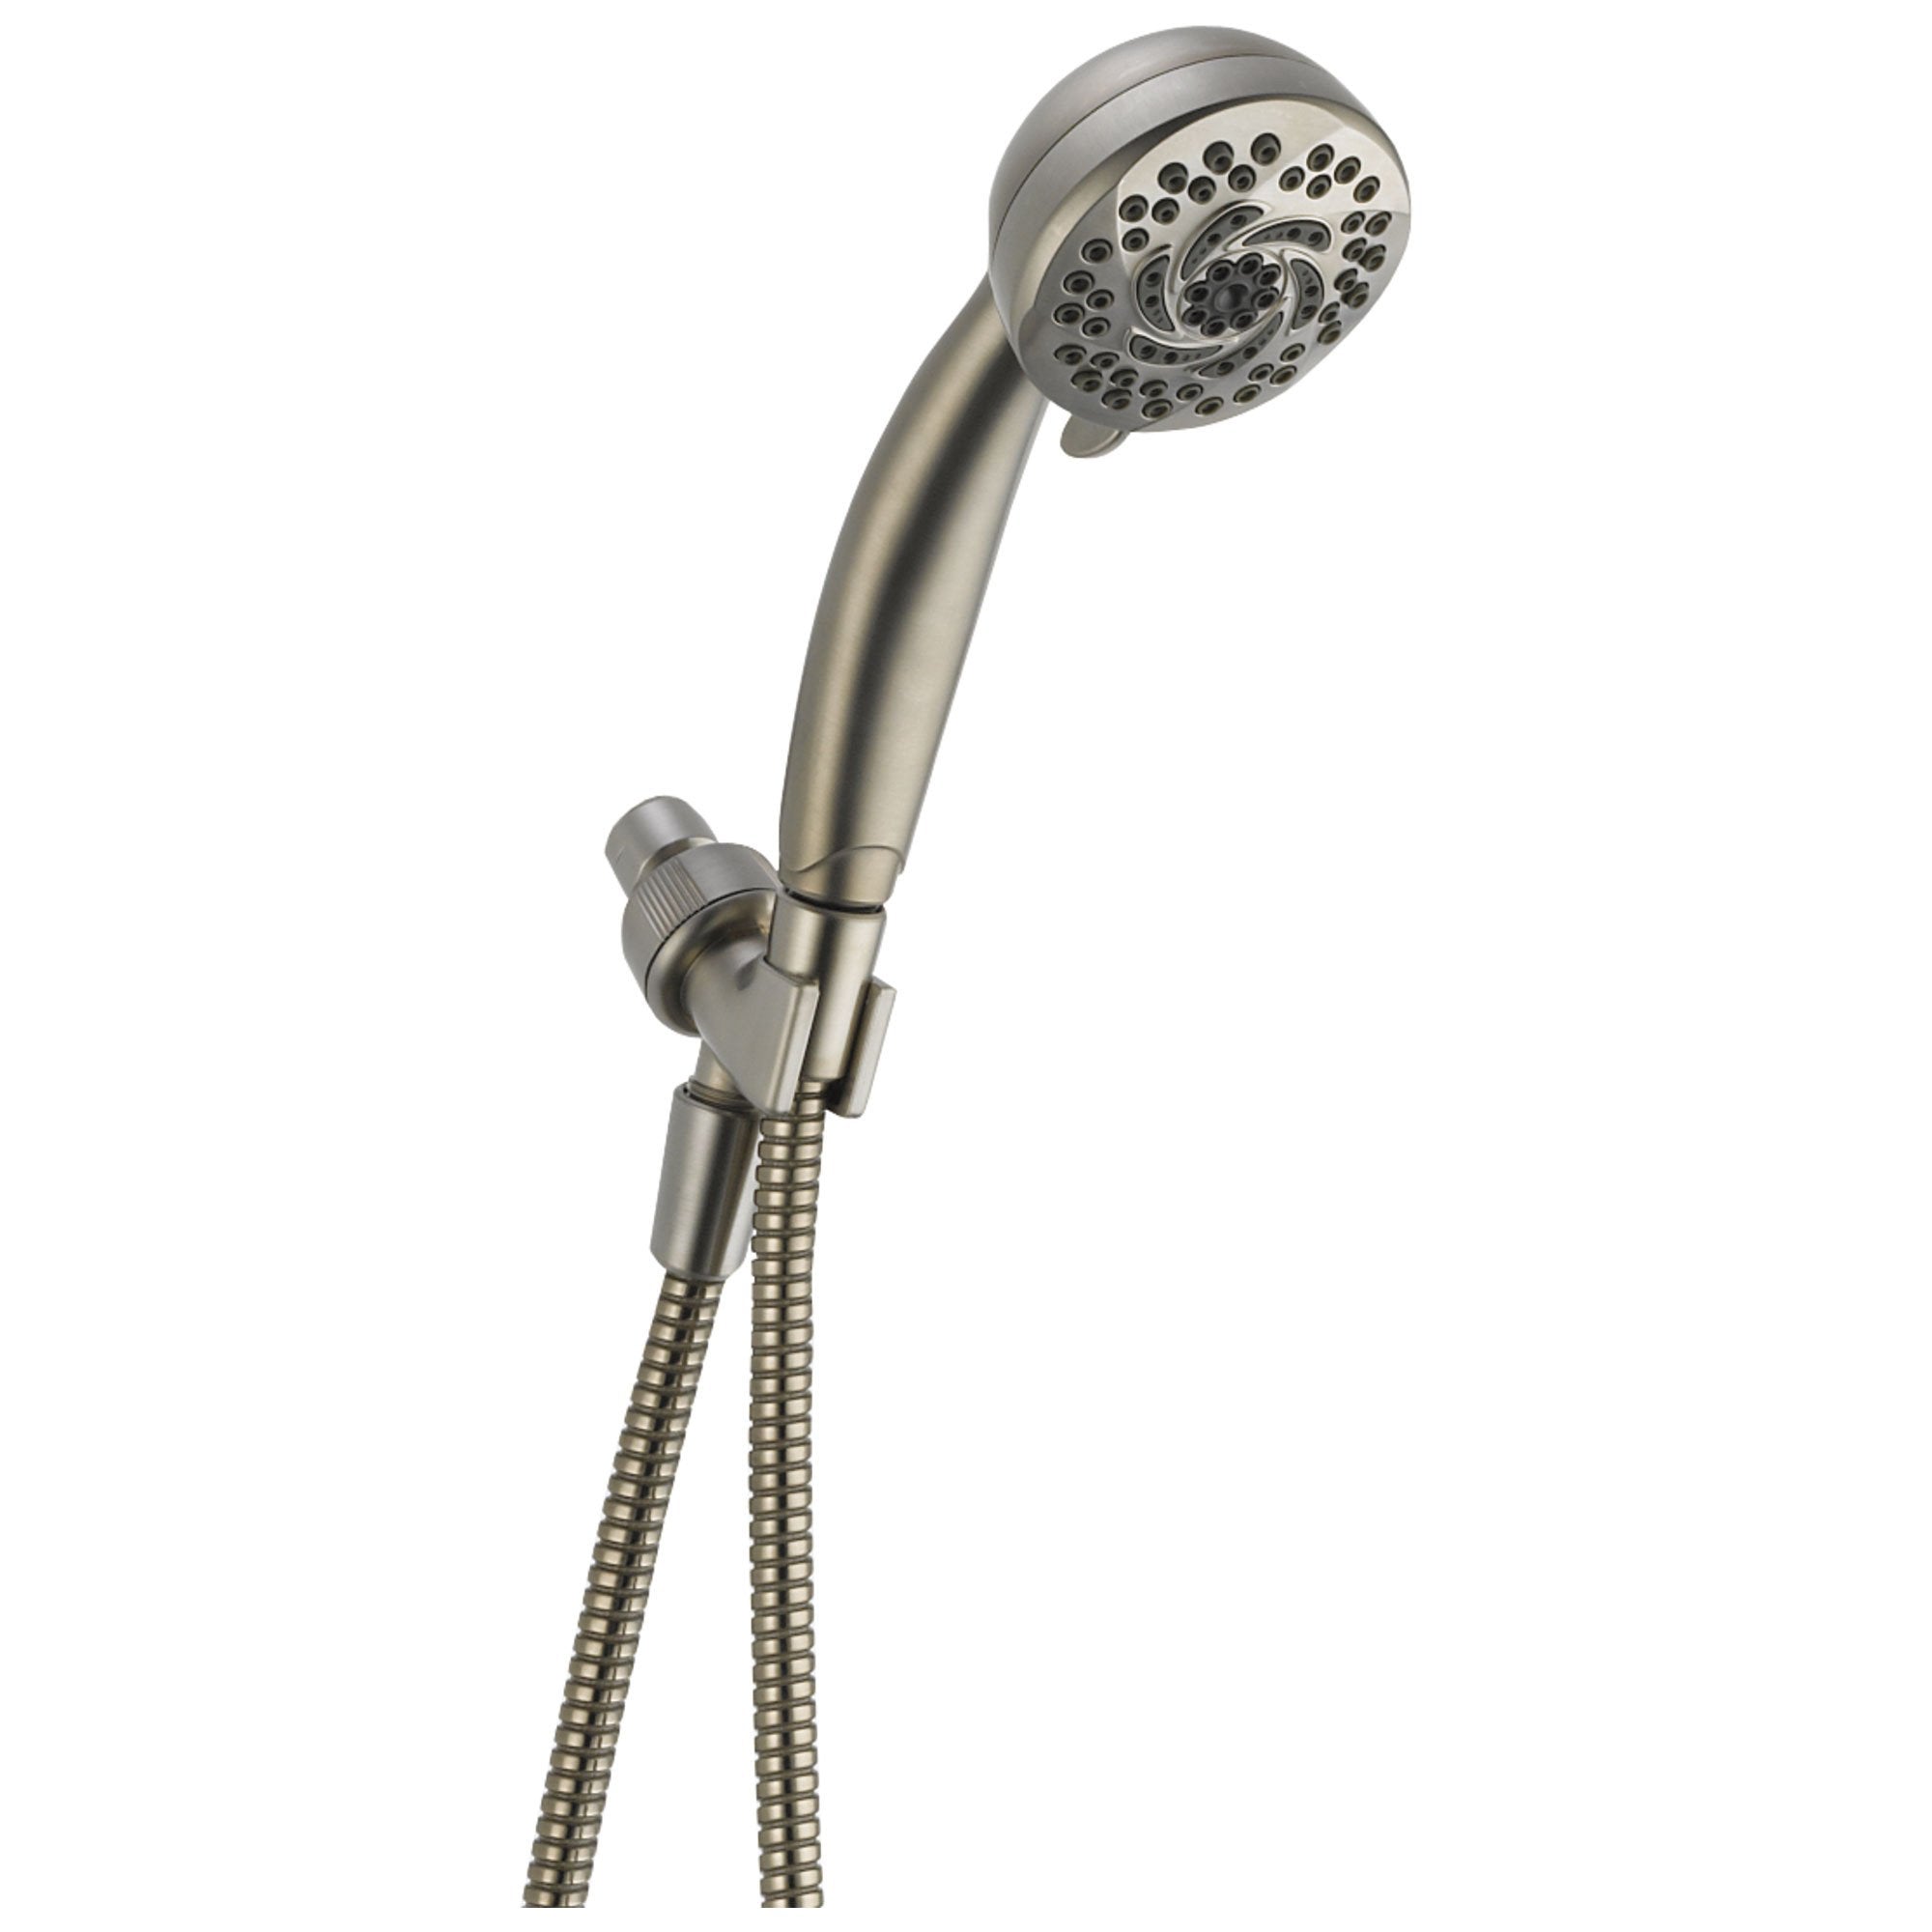 Delta Universal Showering Components Collection Stainless Steel Finish 5-Setting Shower Mount Hand Shower Spray Head with Hose 737453